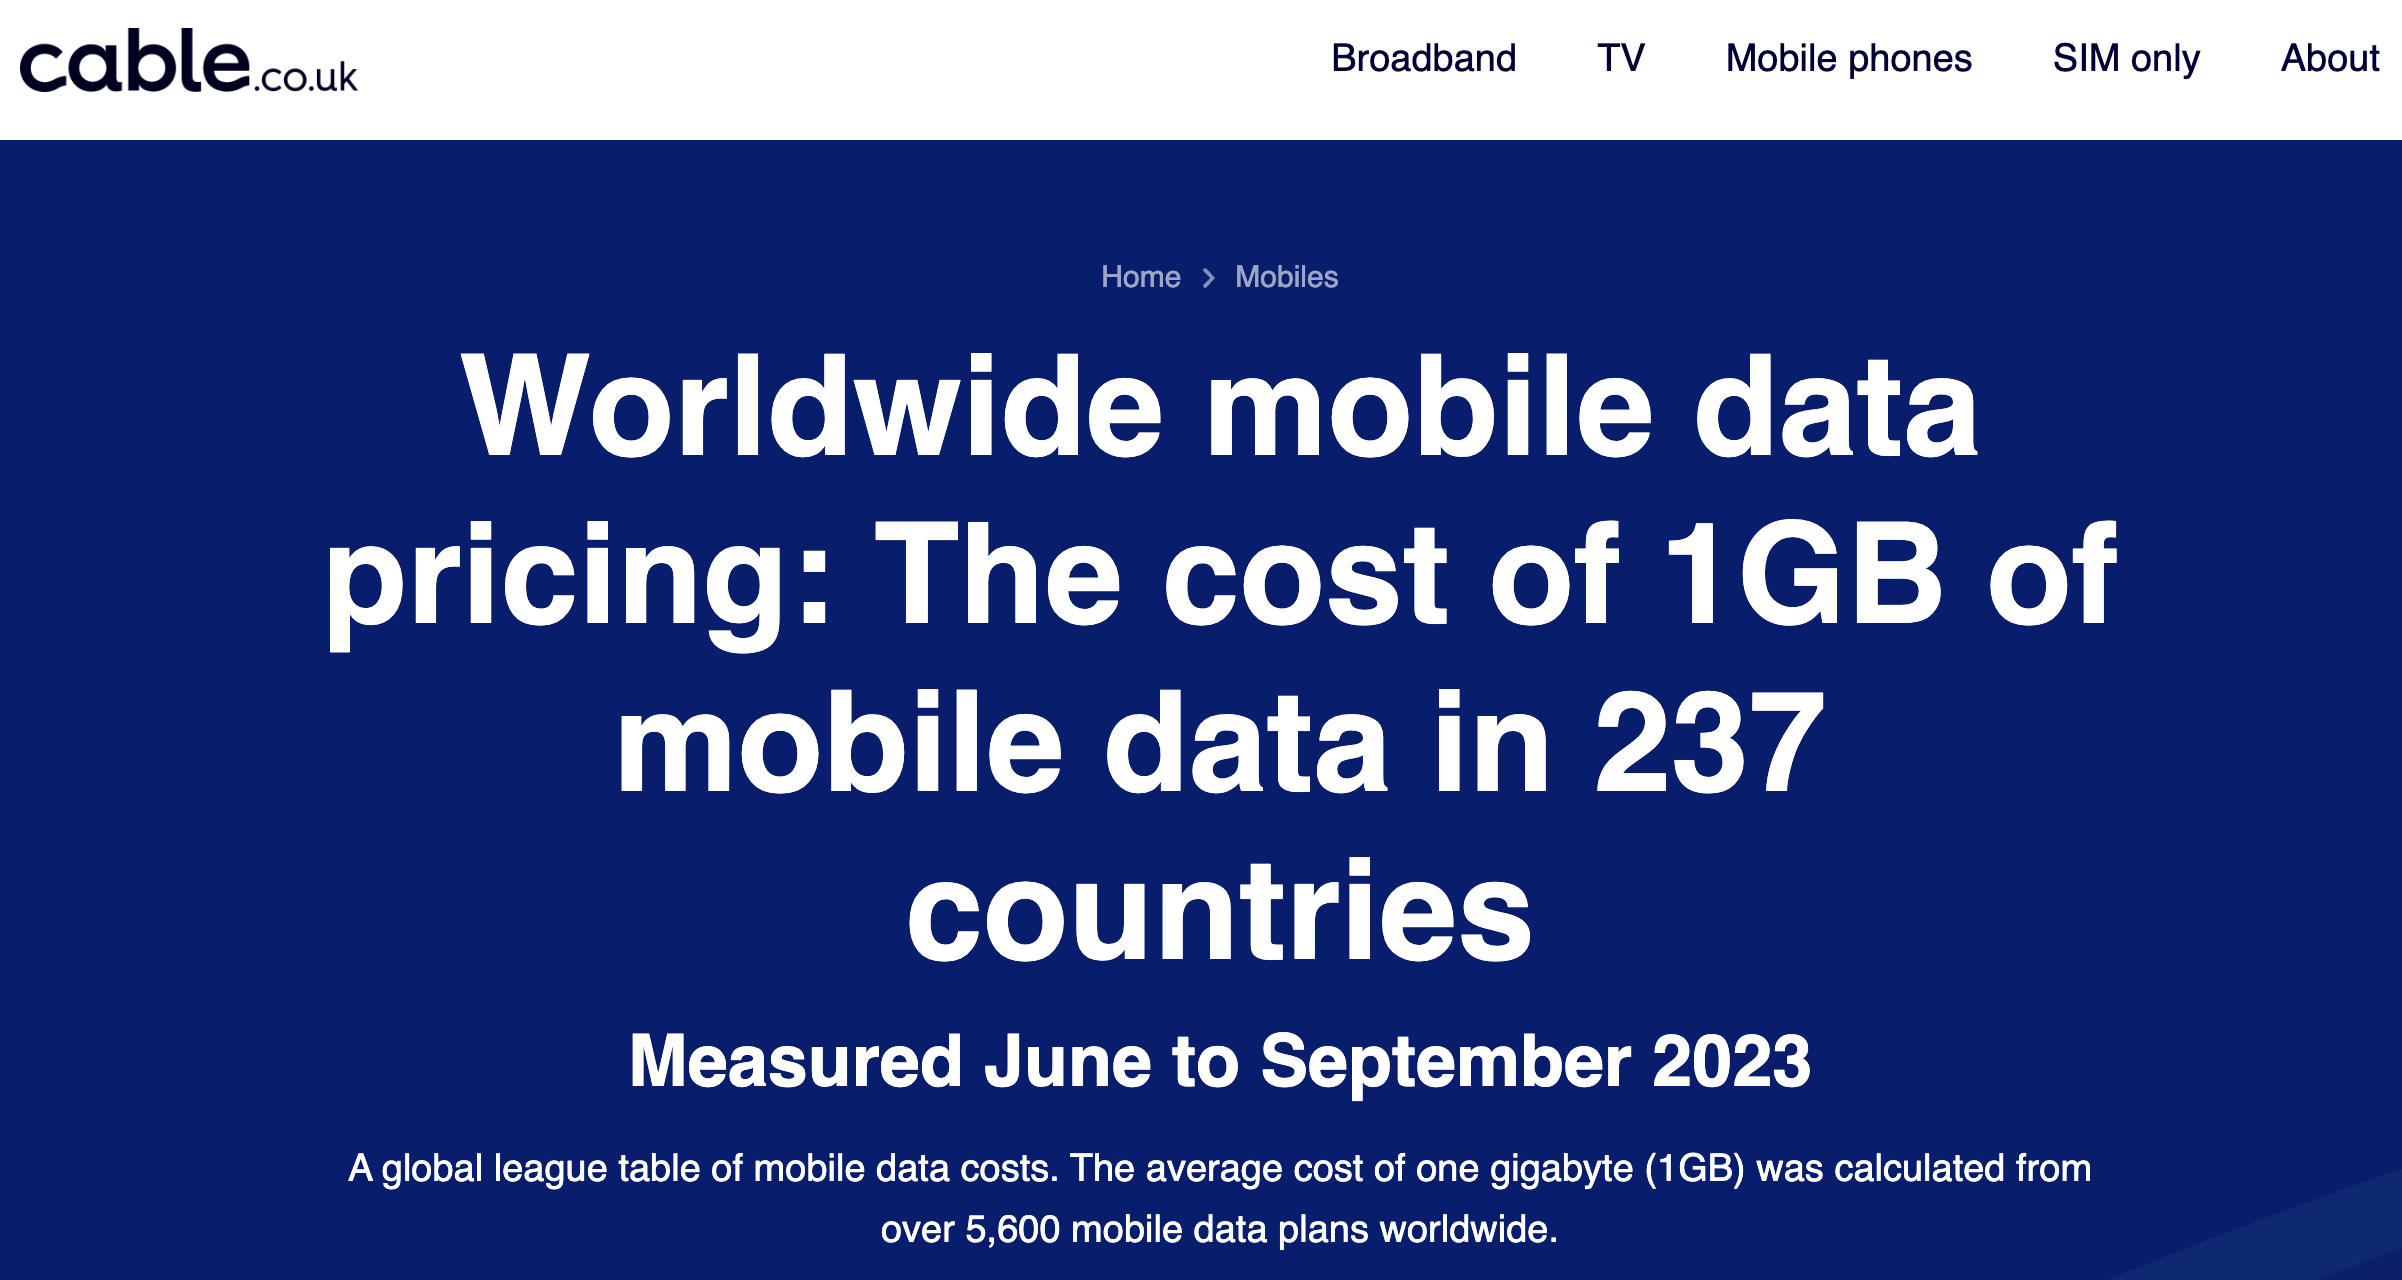 Screenshot from cable.co.uk website where the full data set can be downloaded